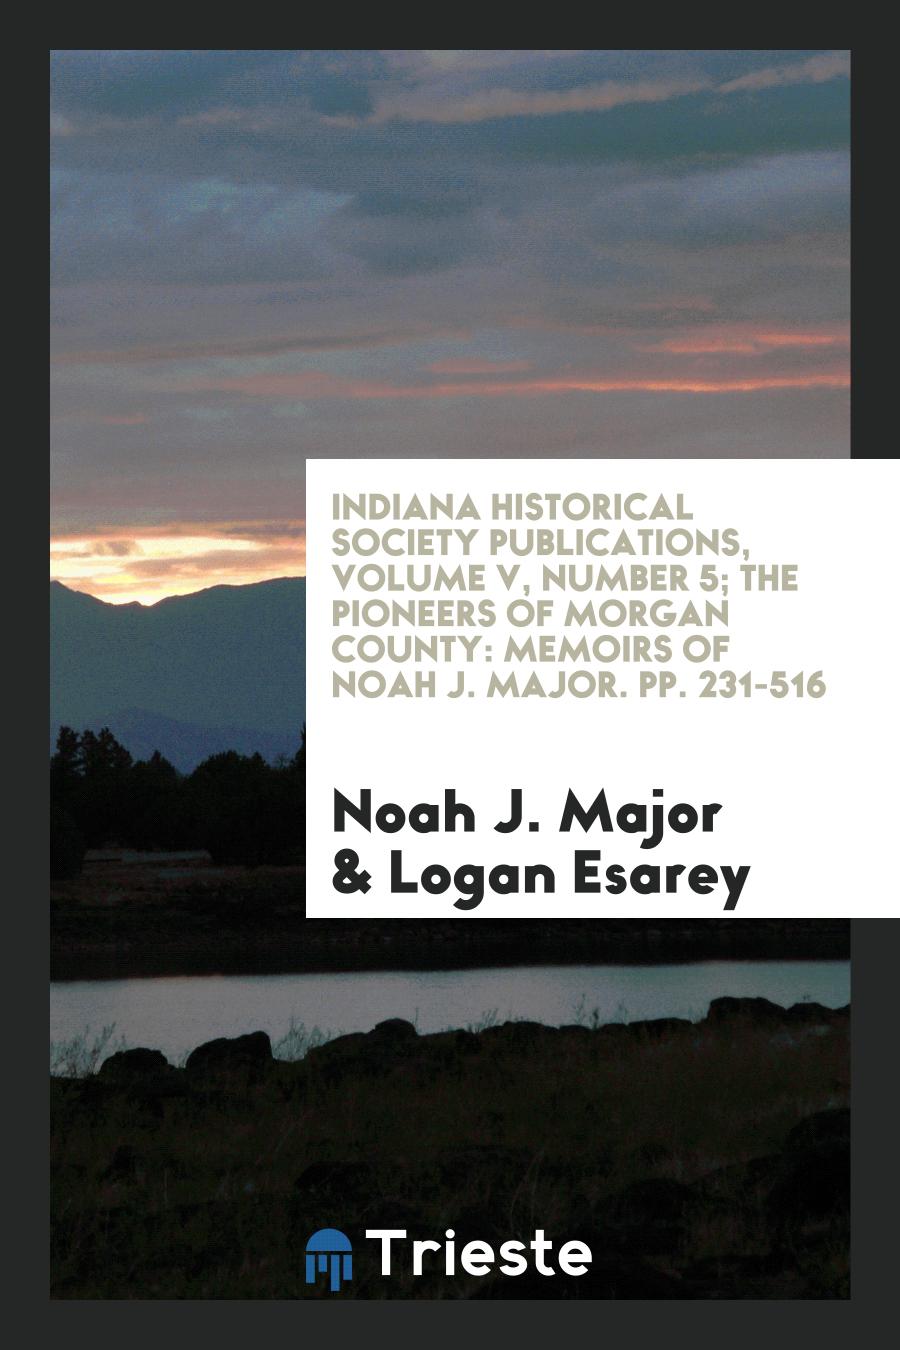 Indiana Historical Society Publications, Volume V, Number 5; The Pioneers of Morgan County: Memoirs of Noah J. Major. pp. 231-516